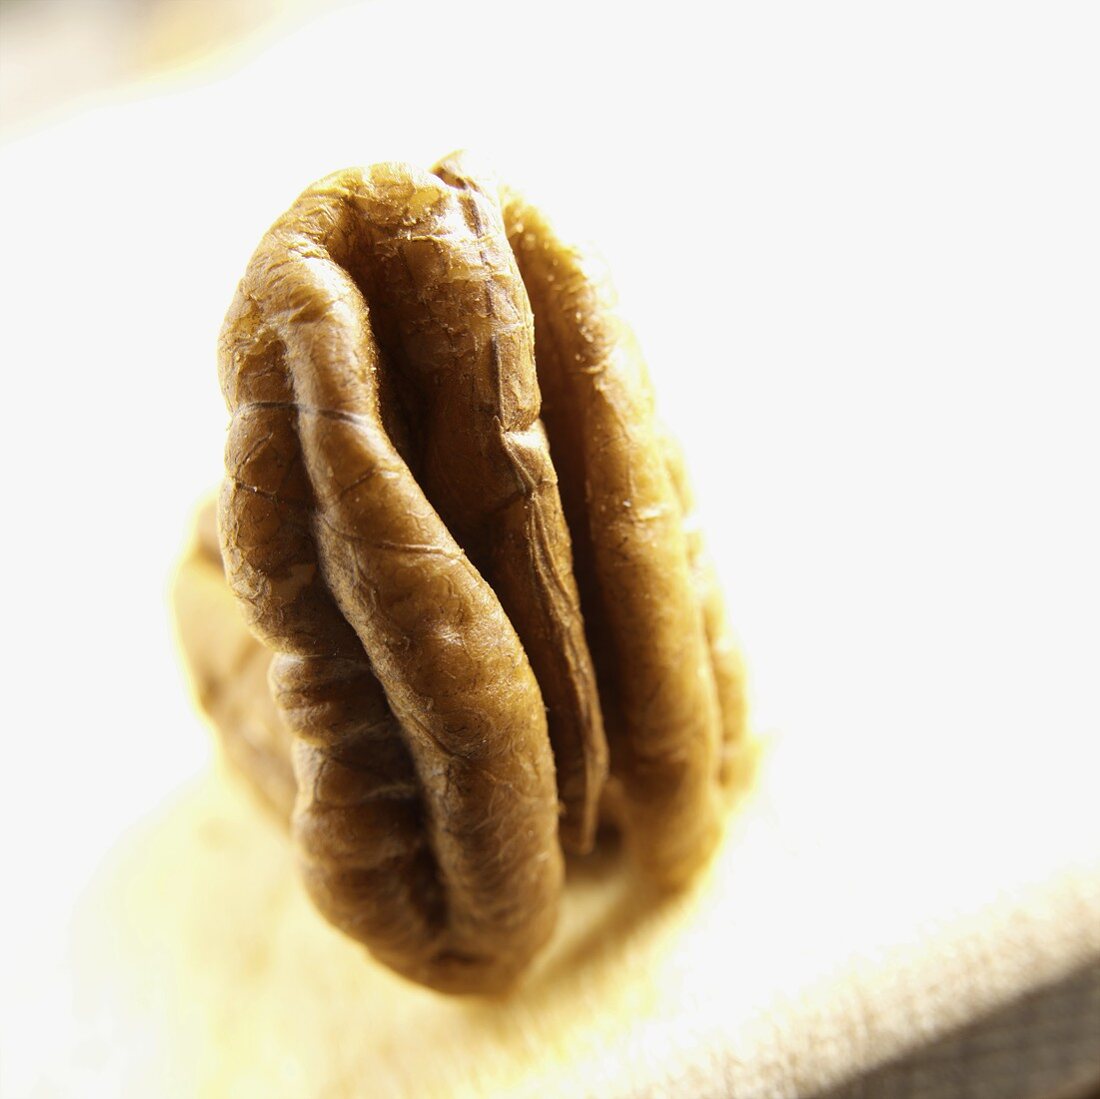 Shelled pecan nut (close-up)